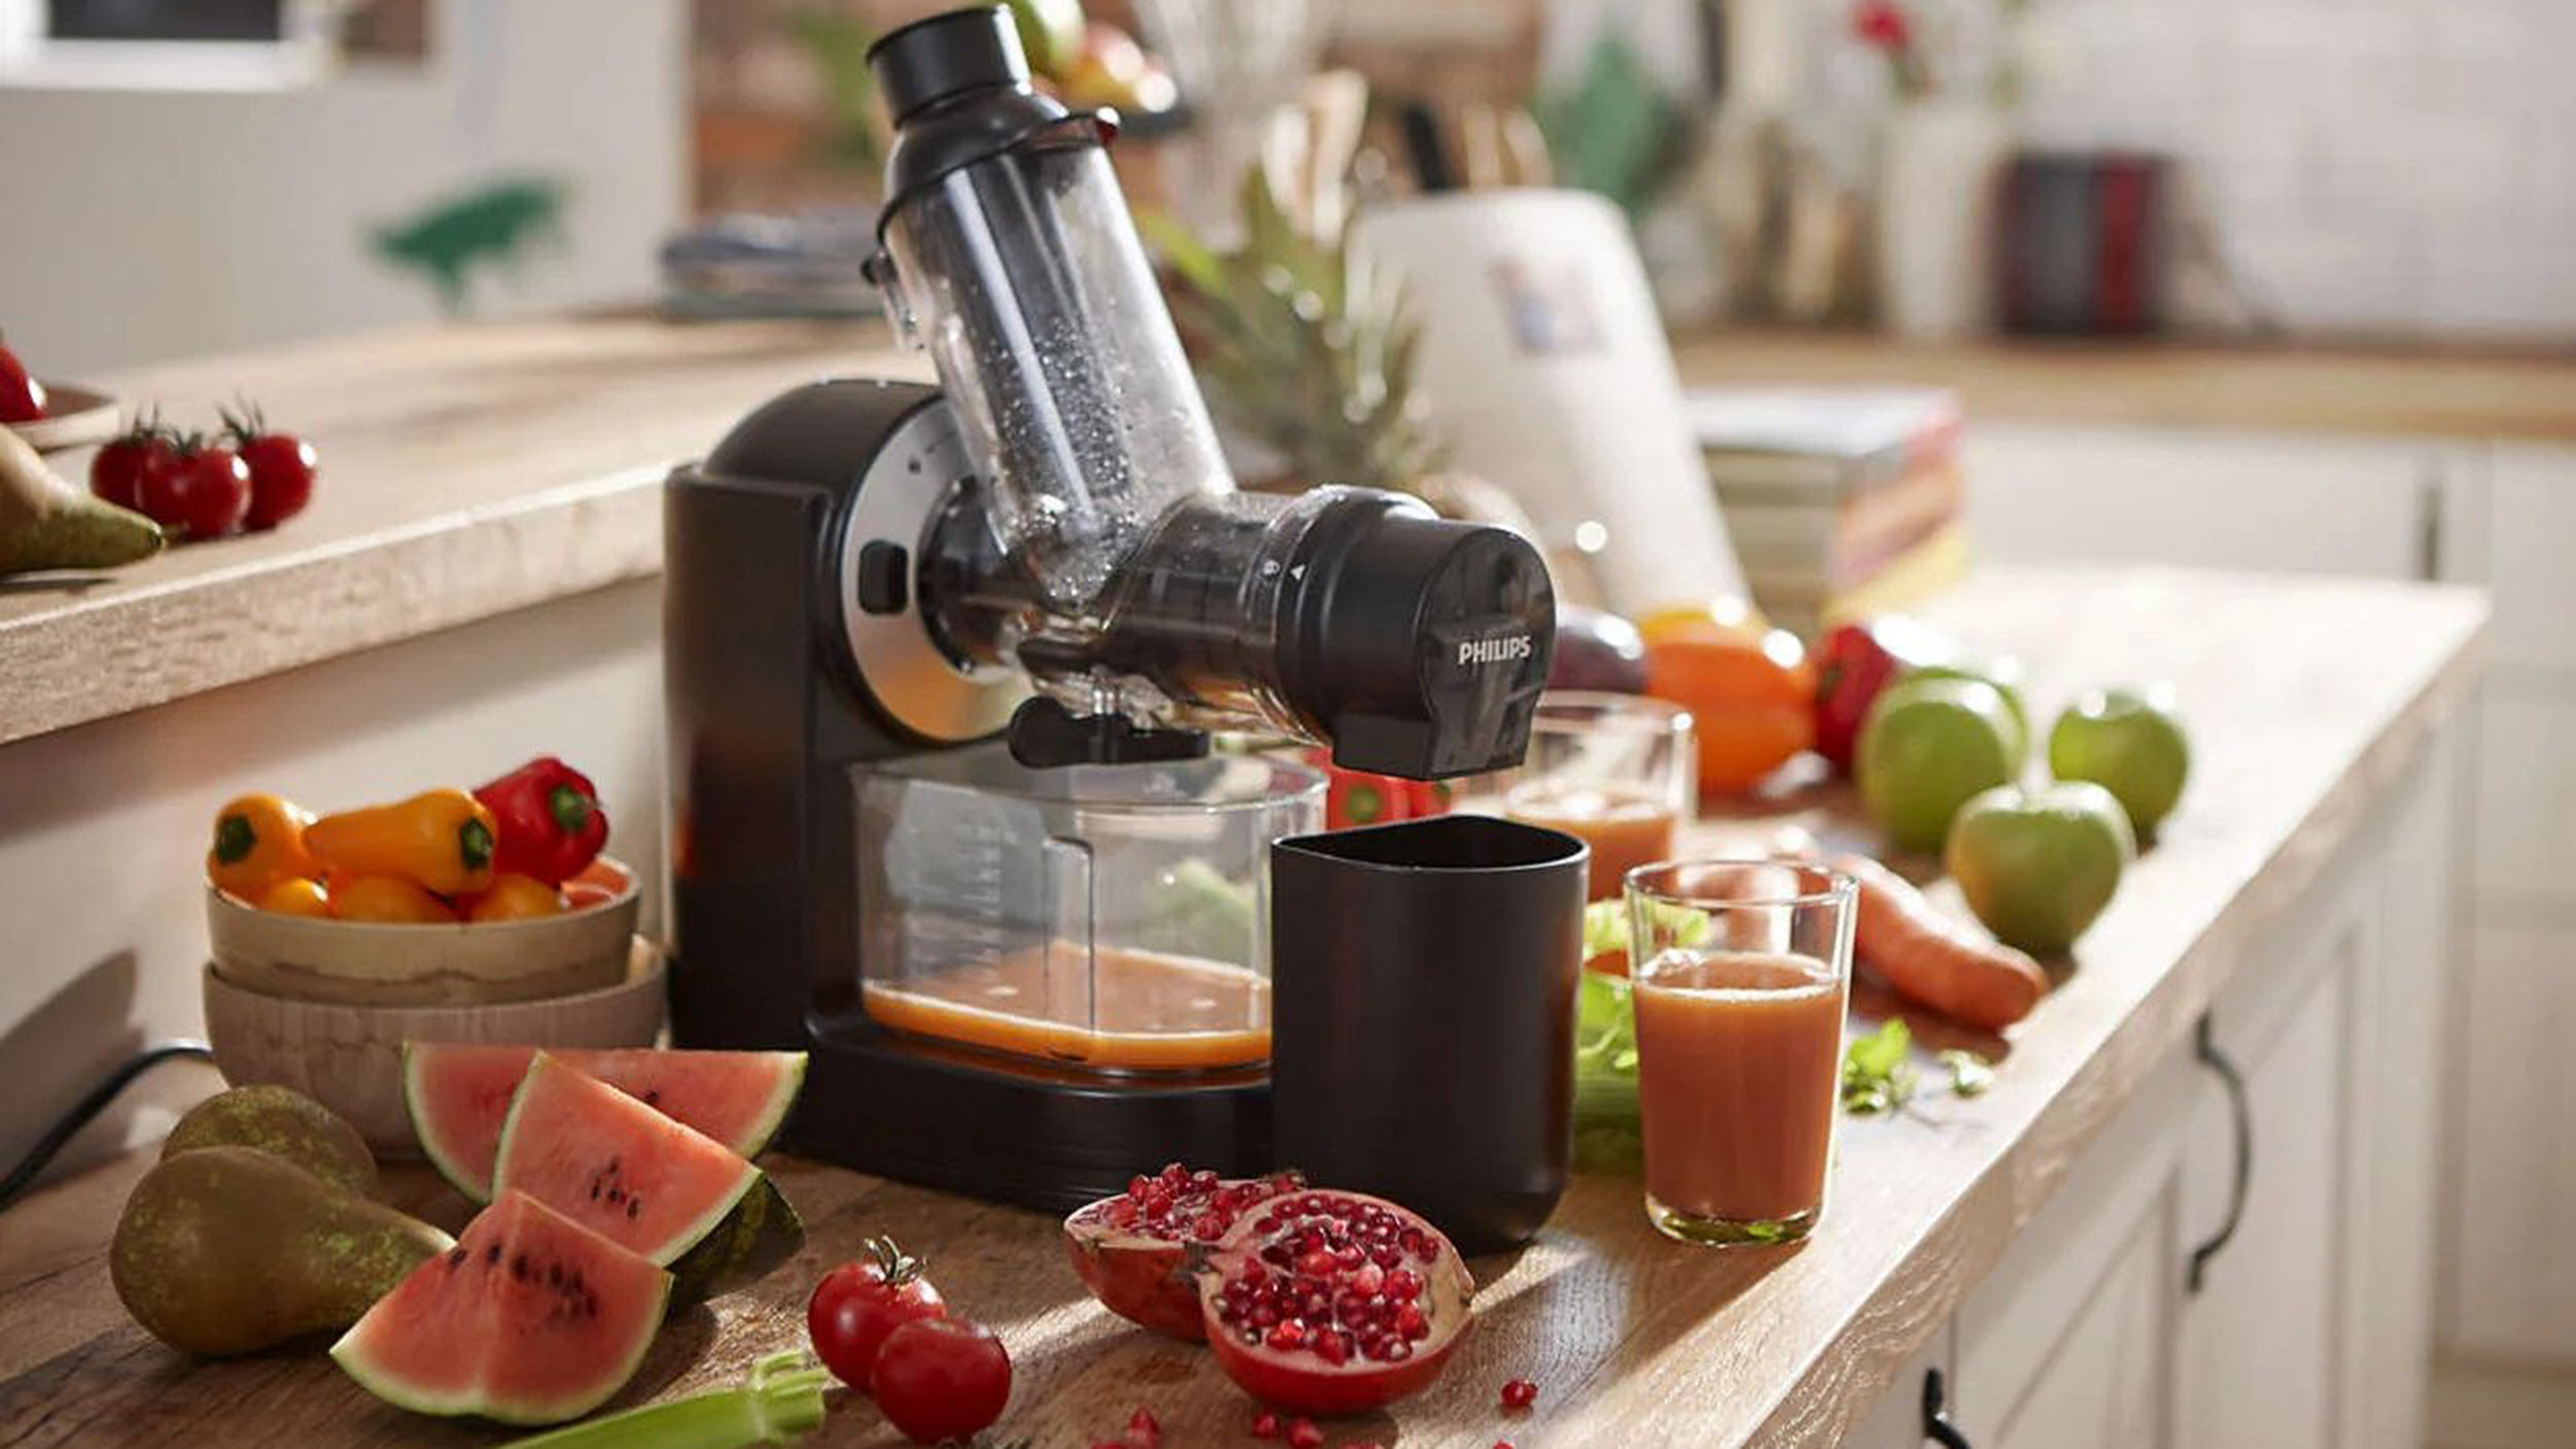 Hurom H-AA Slow Juicer Review: An Efficient, High-End Juicer